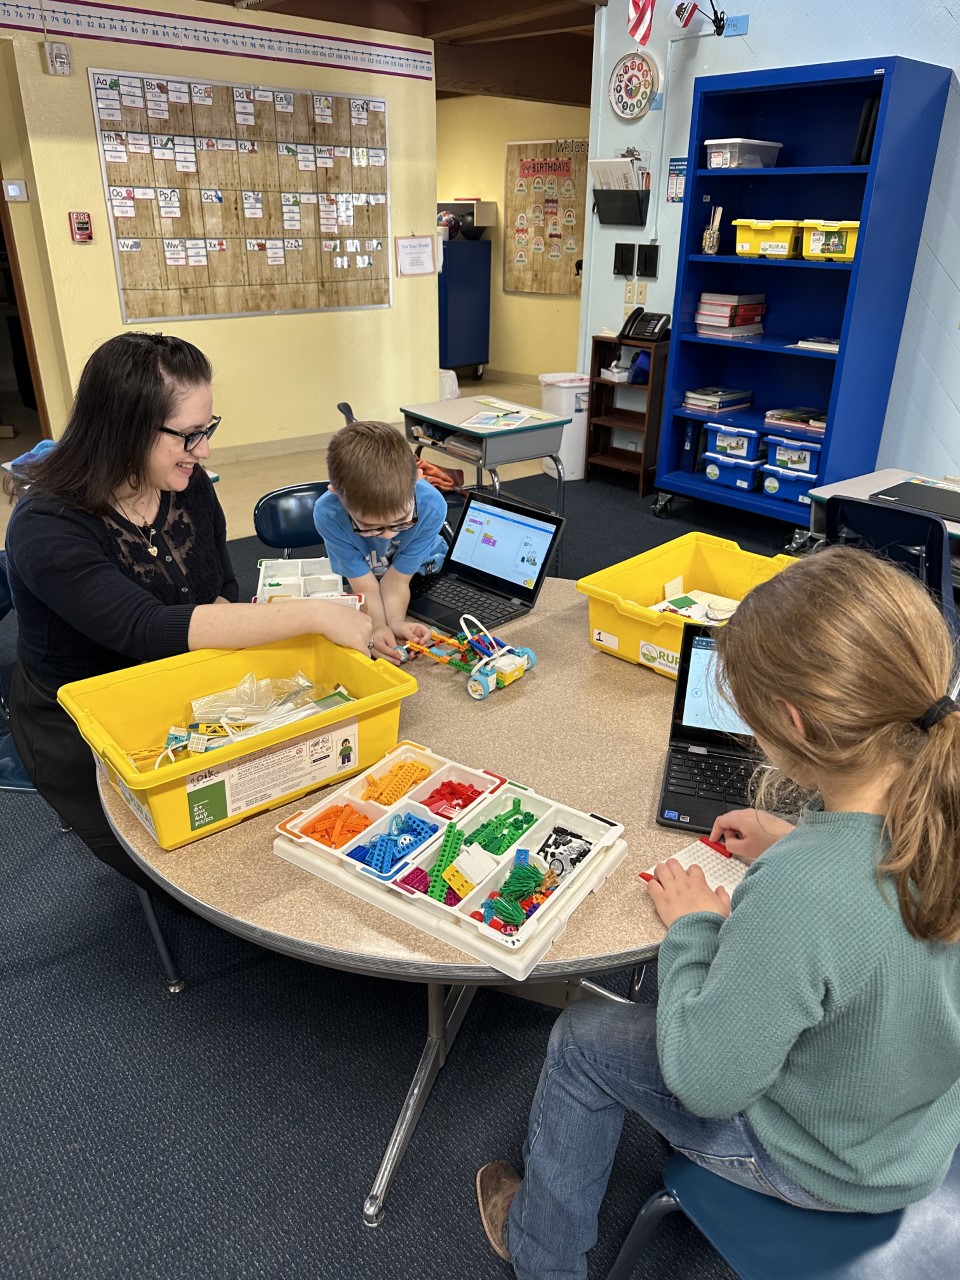 Educator Amanda sits with two of her students at a classroom table, working with Lego Spikes.